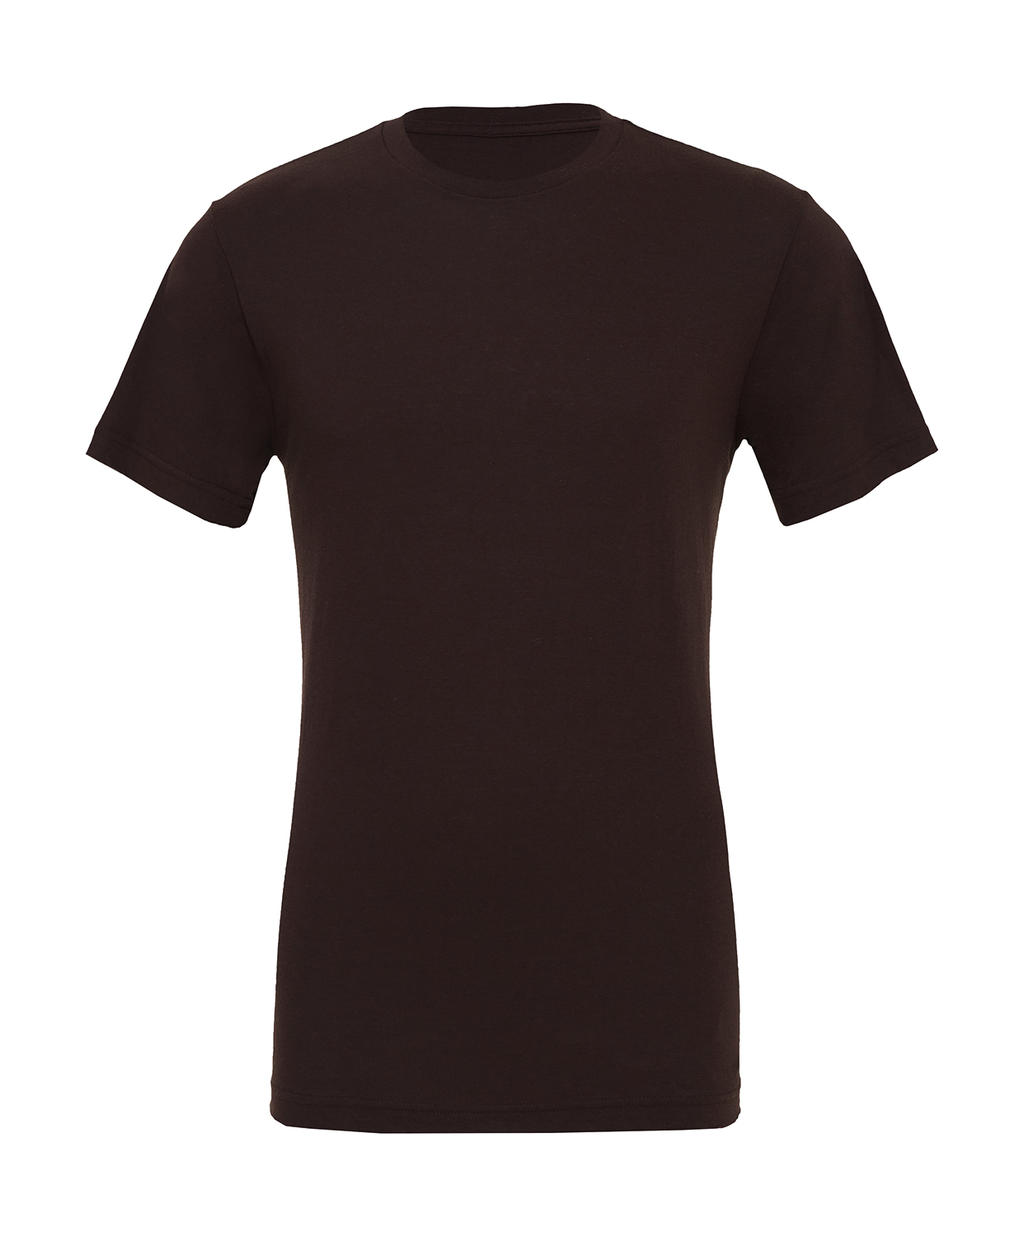  Unisex Jersey Short Sleeve Tee in Farbe Brown